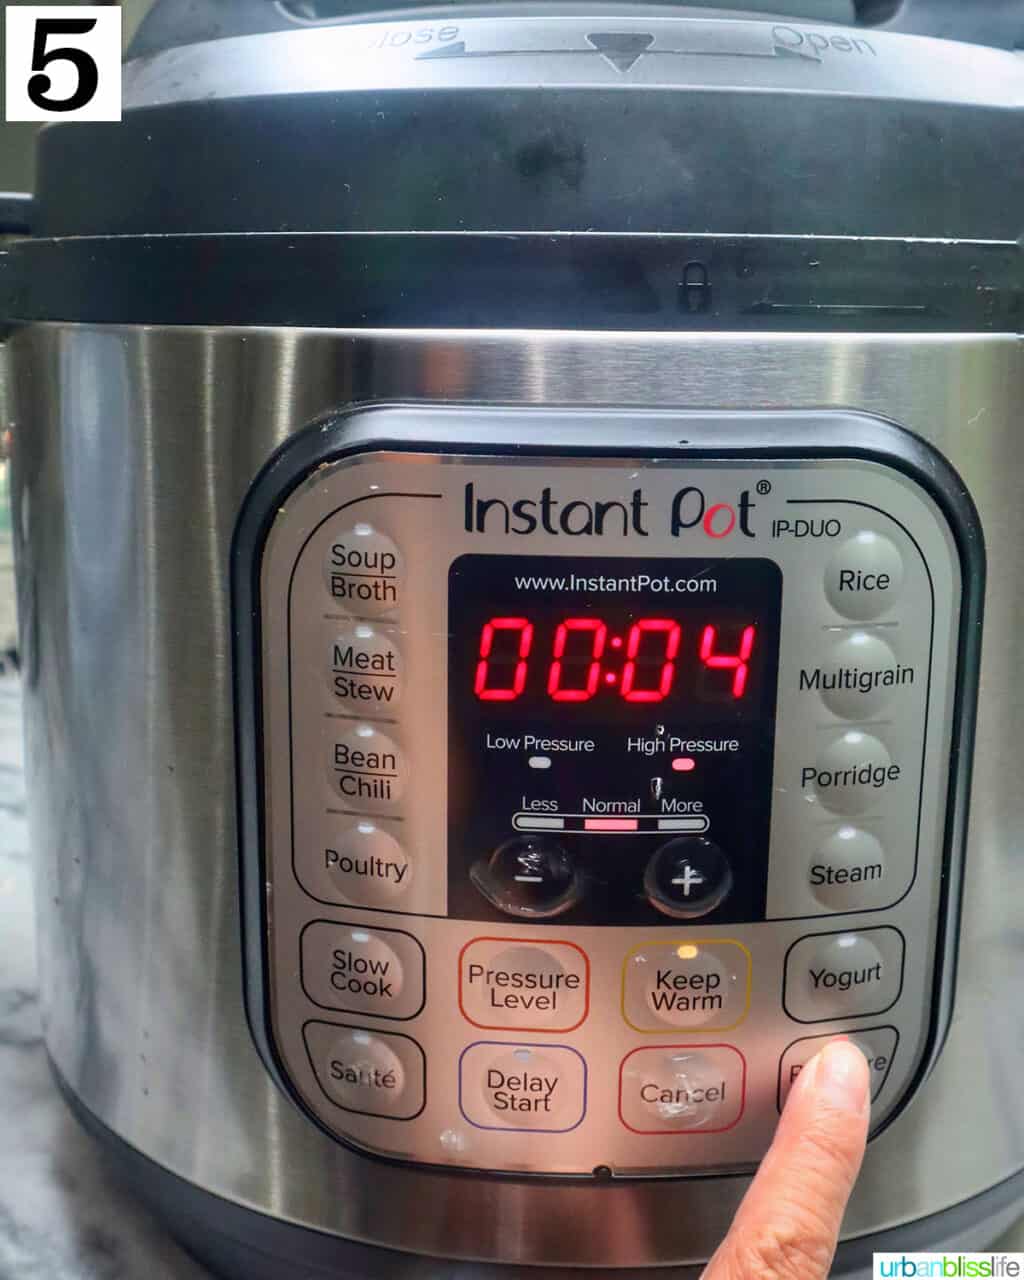 finger pressing start on an instant pot set to pressure cook on high for 4 minutes.